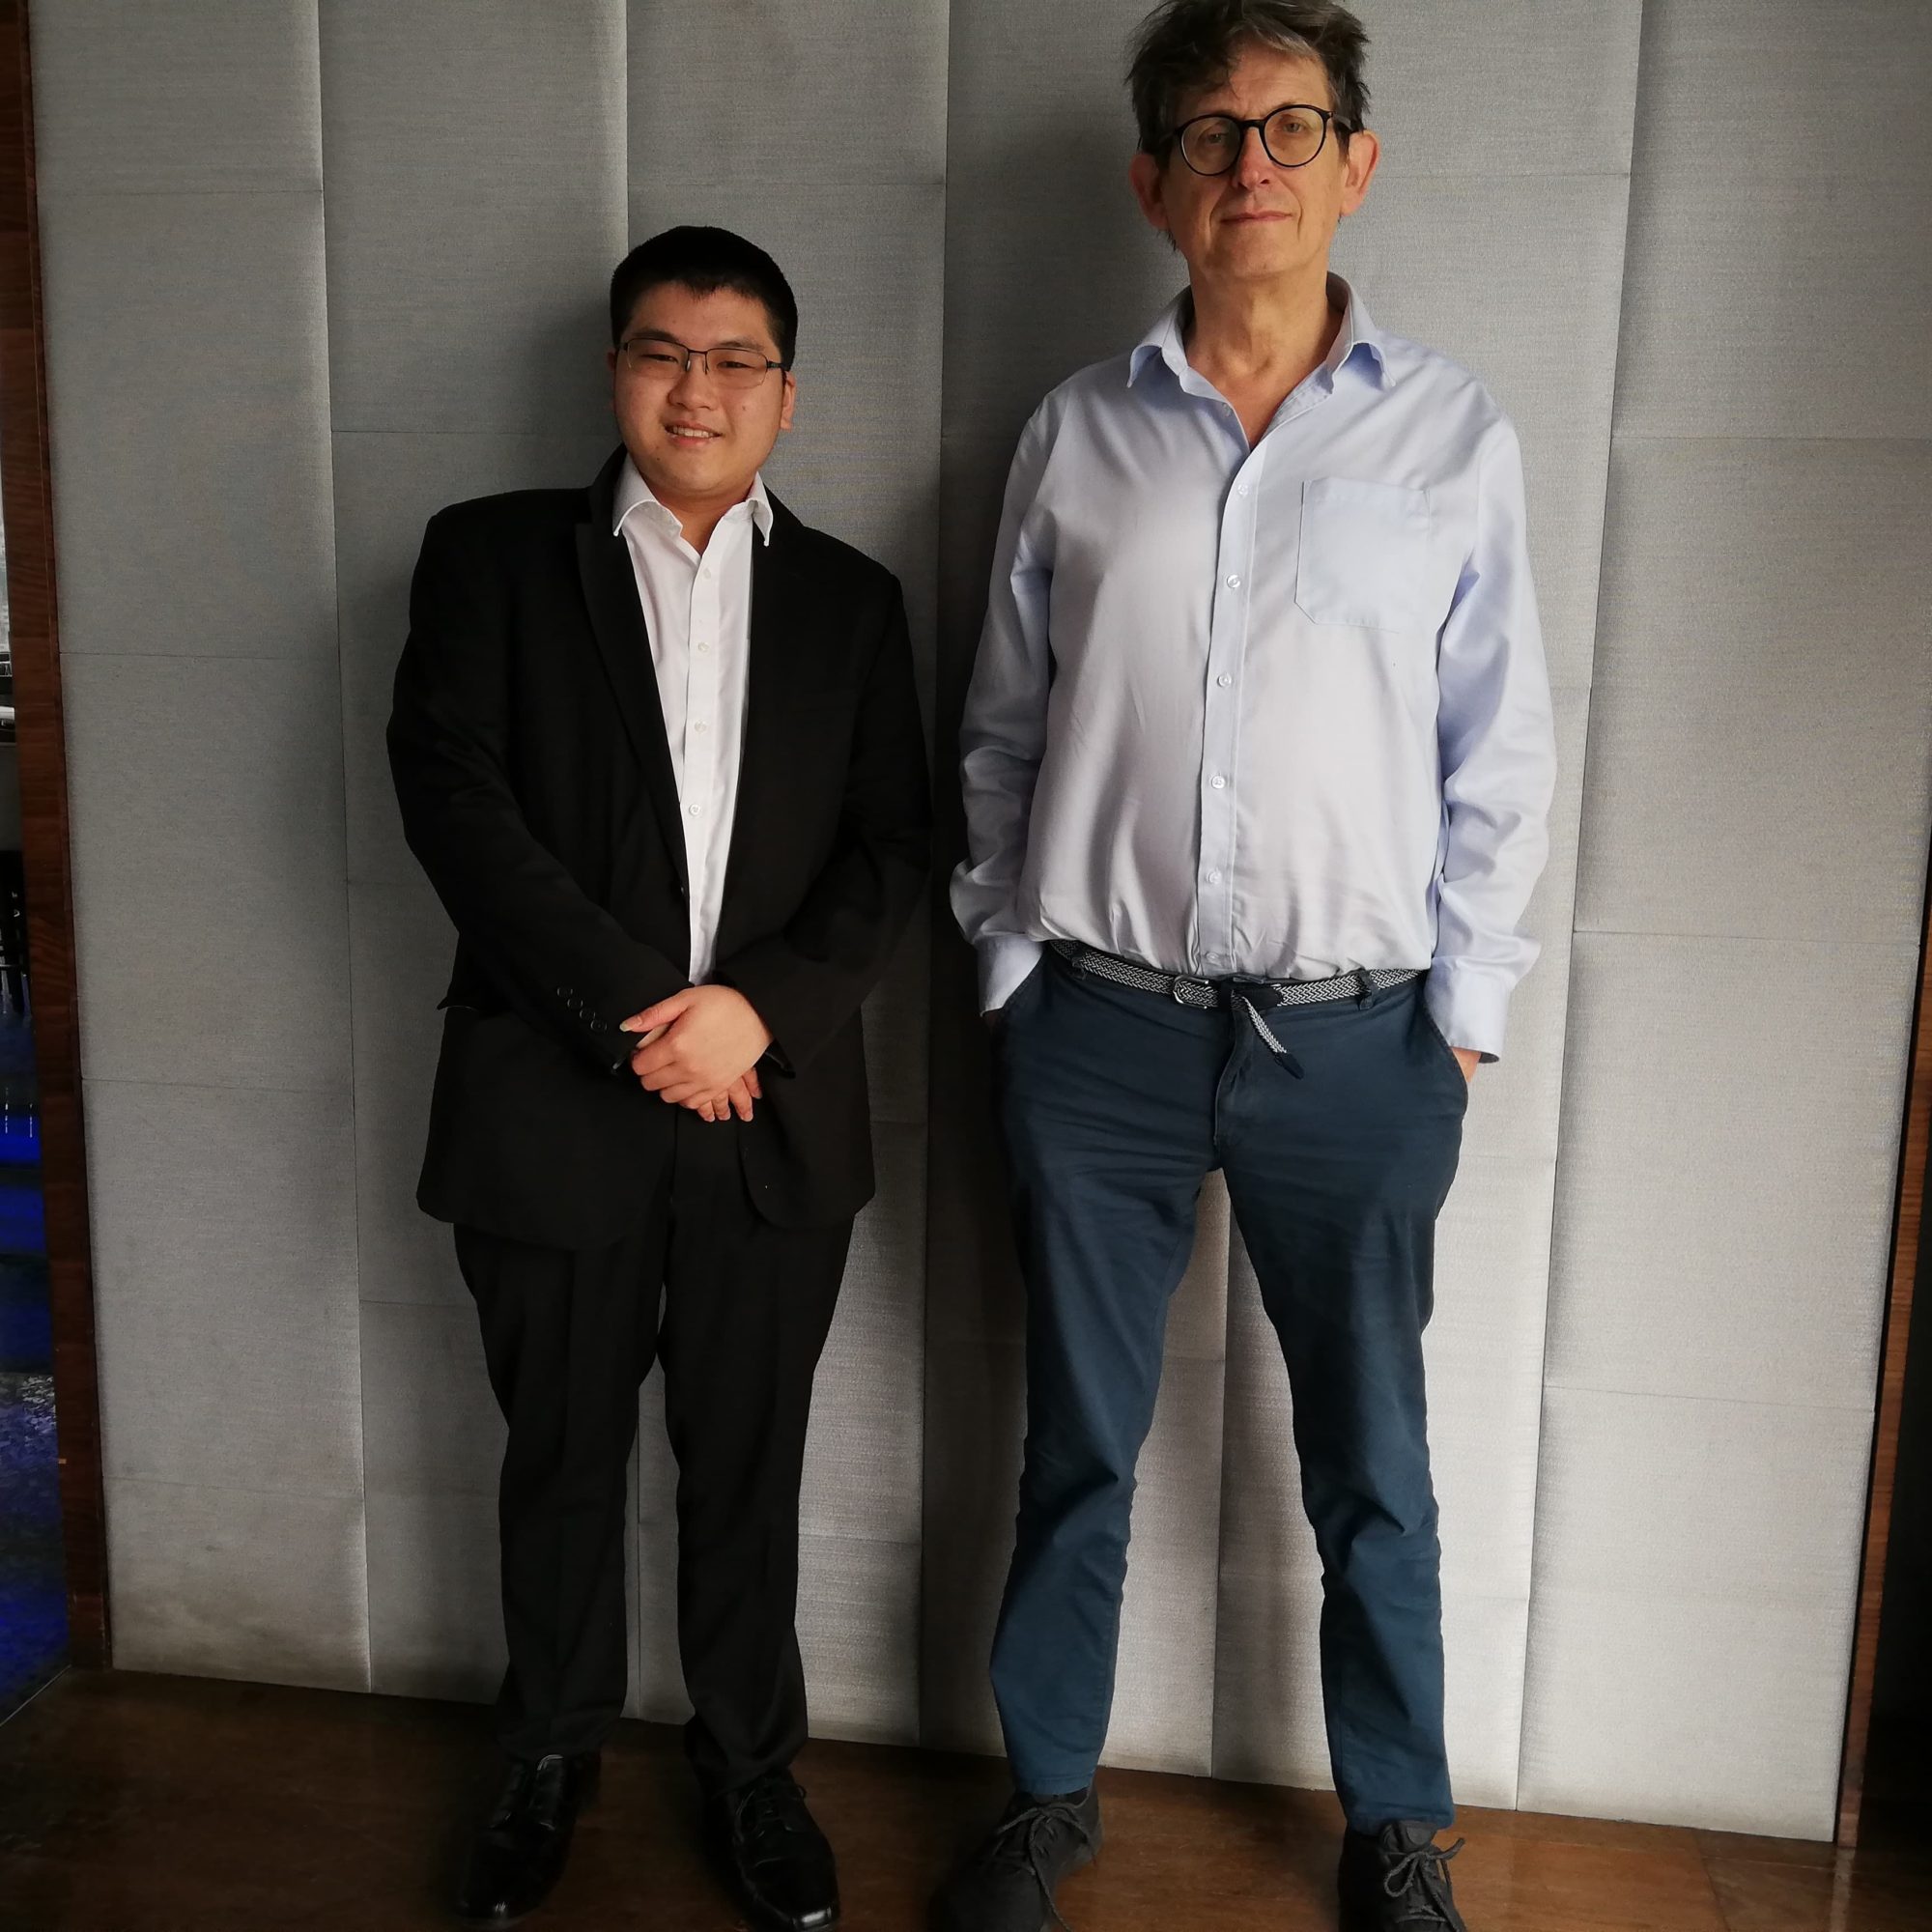 On Truth-telling in Age of Truthlessness: An Interview with Alan Rusbridger